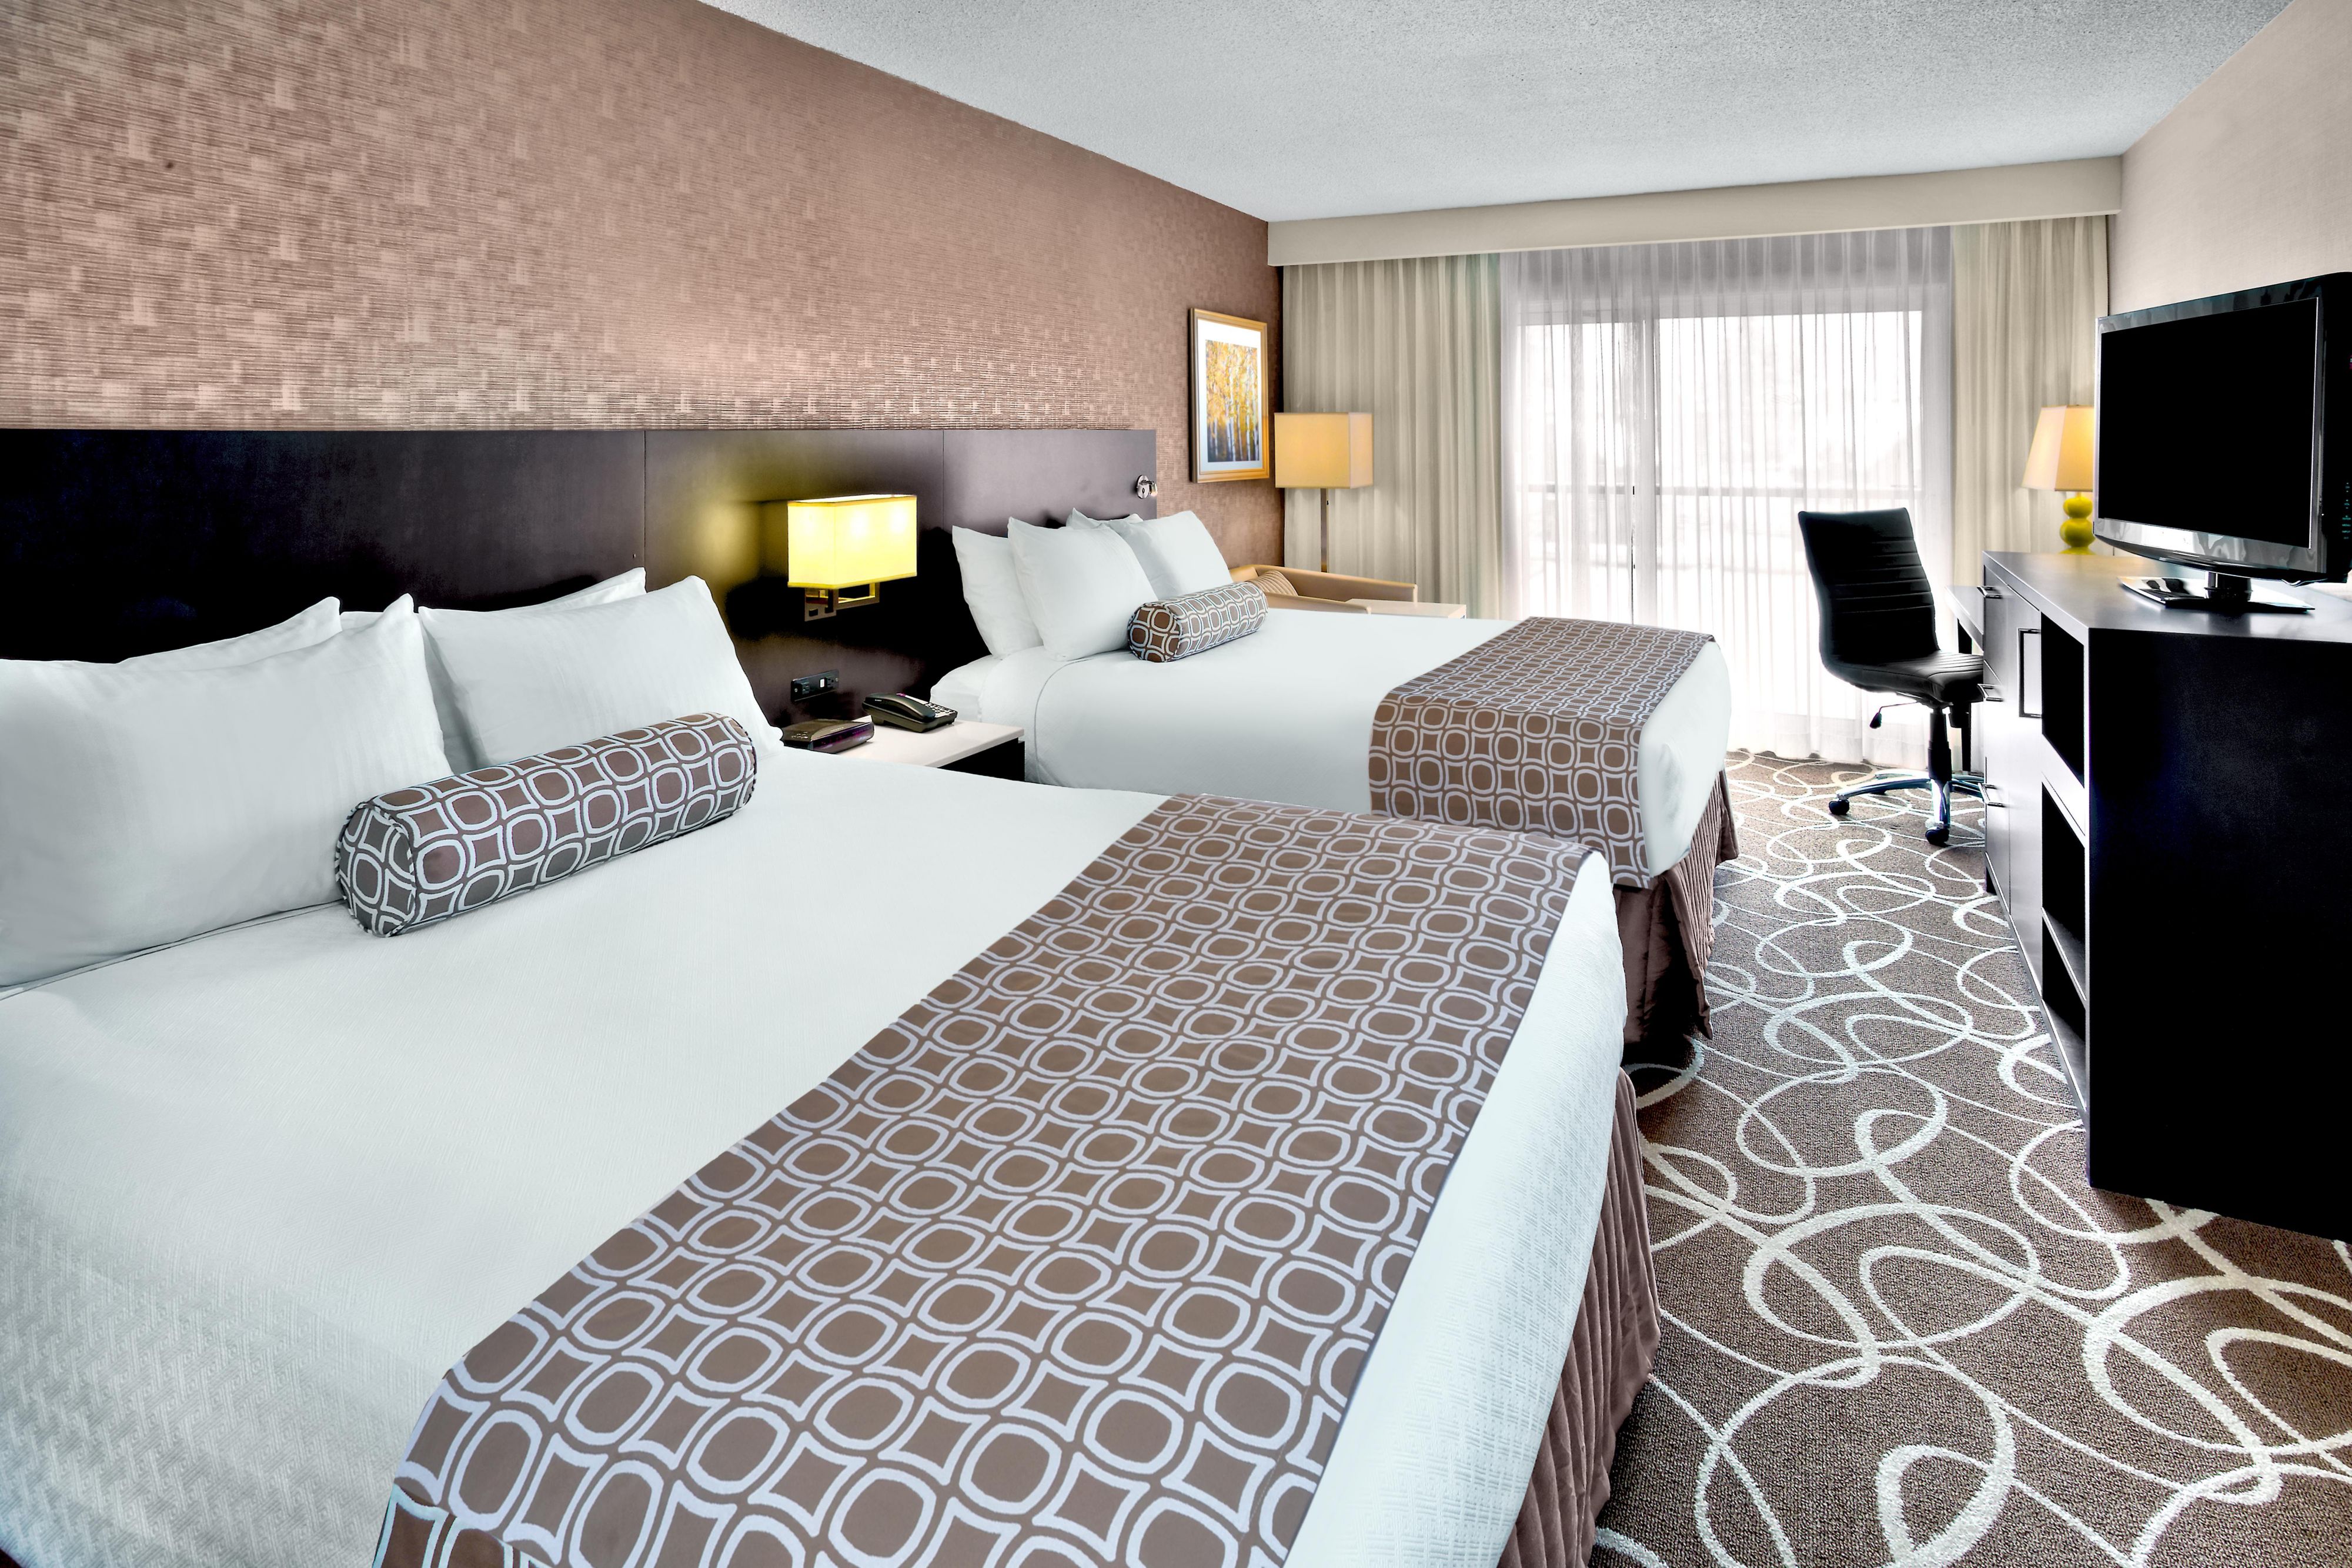 We take pride in making everything spotless for your arrival. 